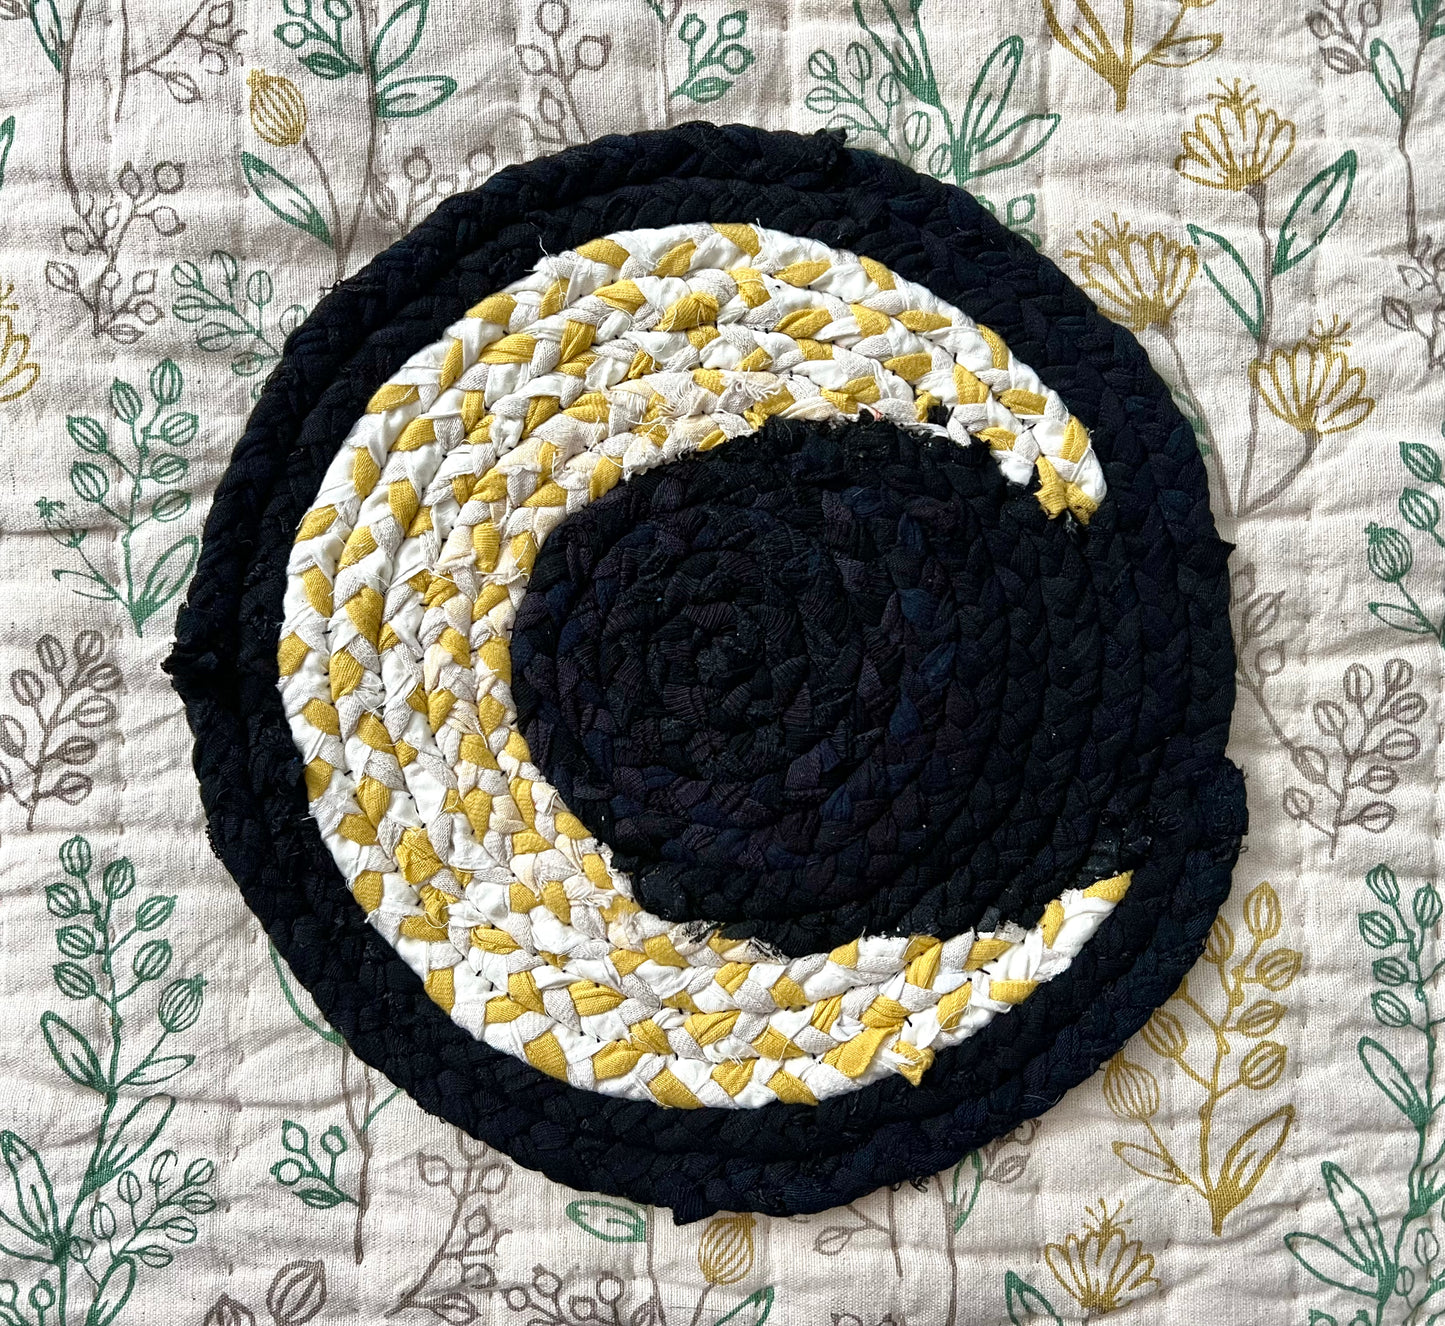 Crescent moon handbraided plant or candle mat, aerial view